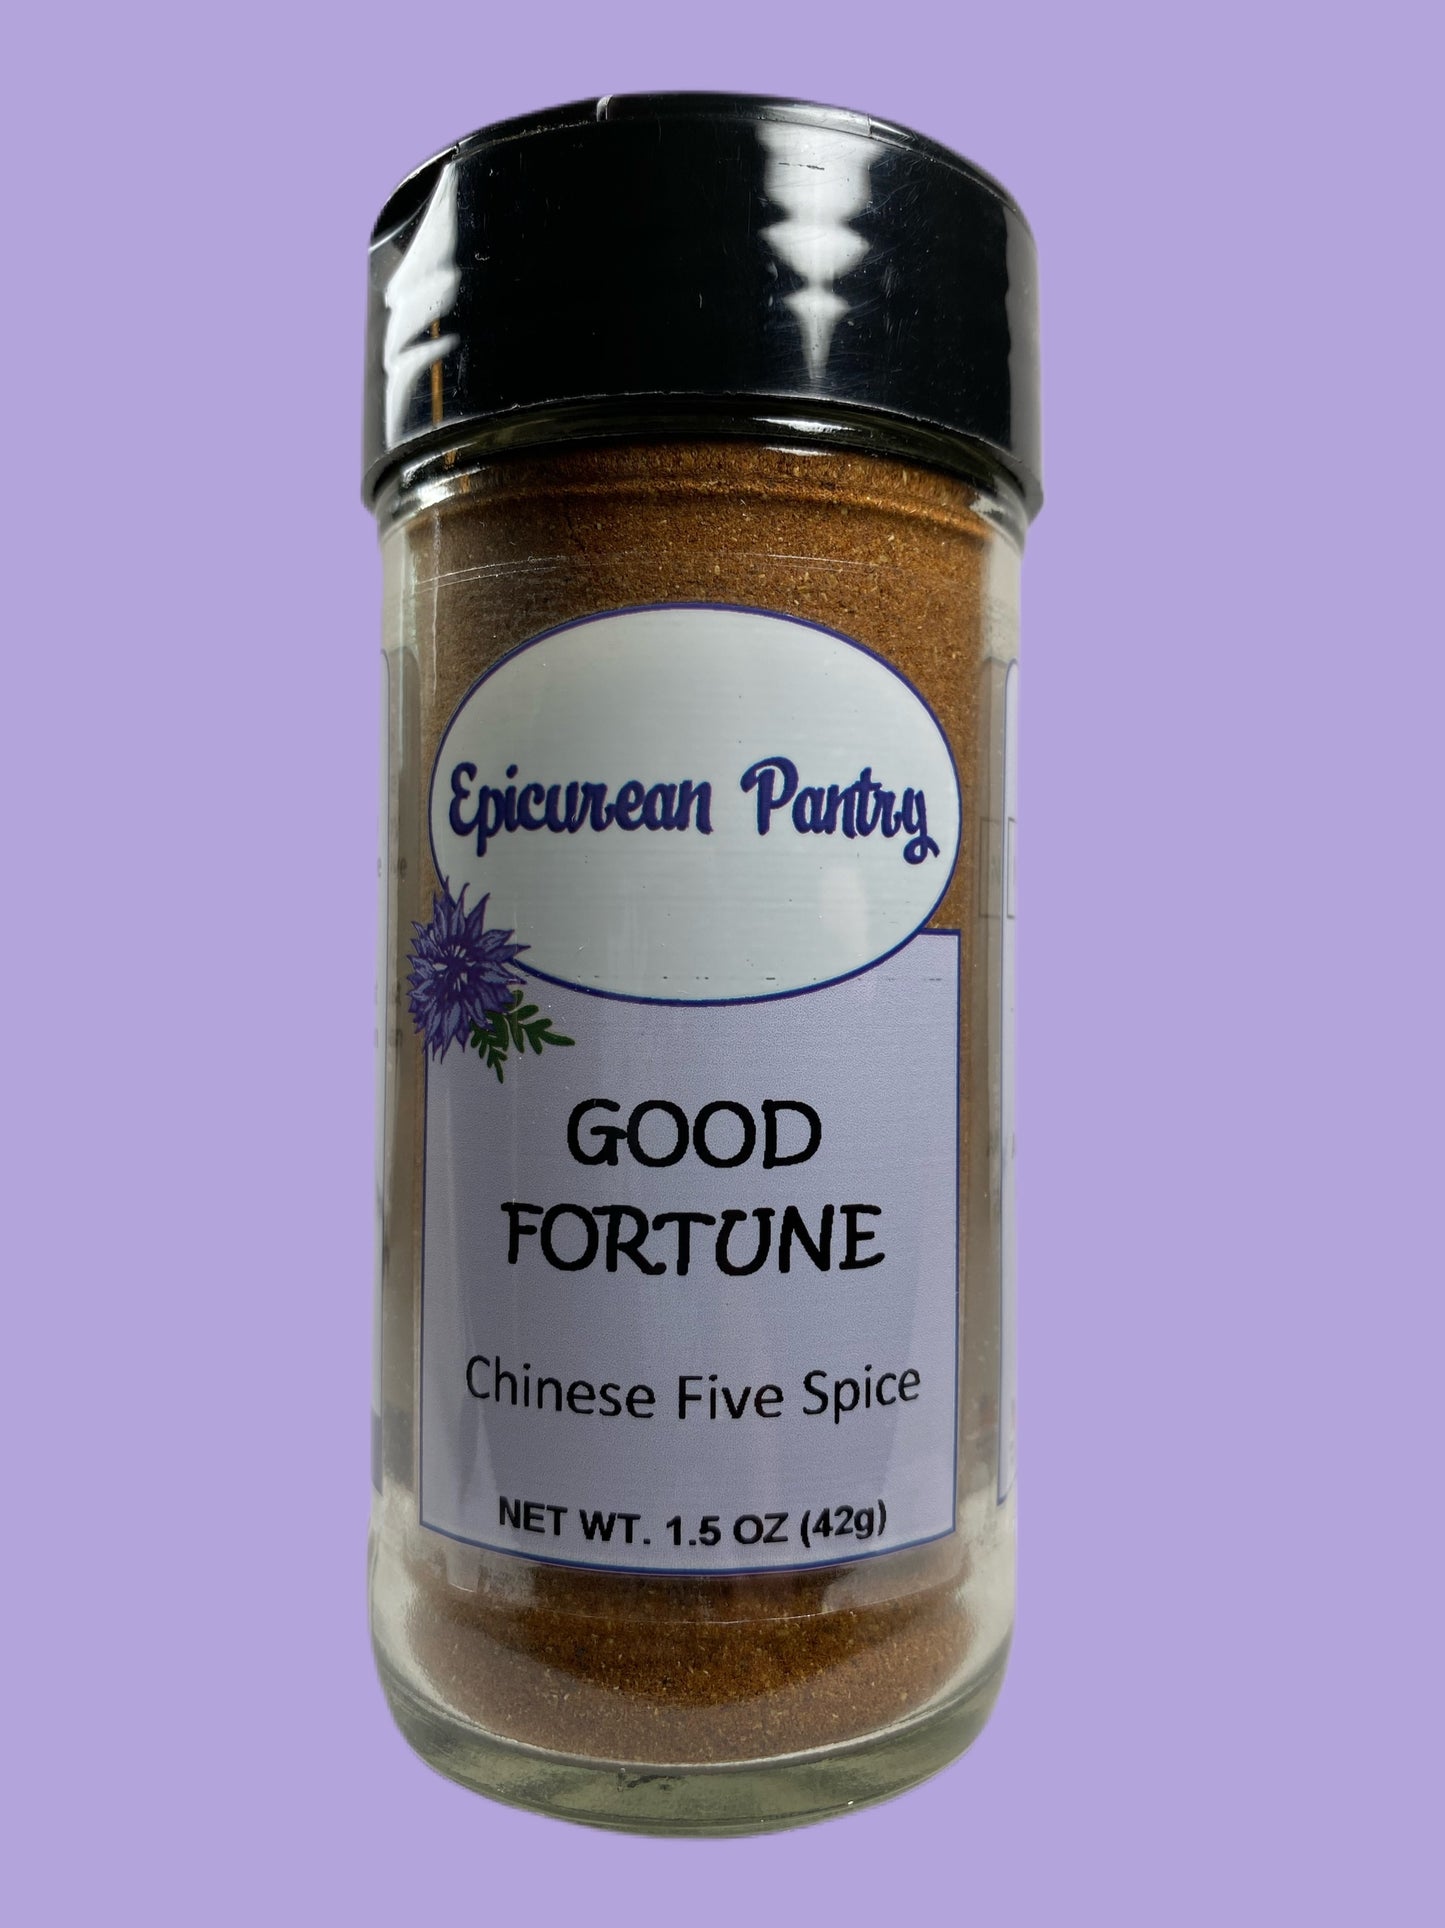 Good Fortune - Chinese Five Spice - 1.50 oz net wt